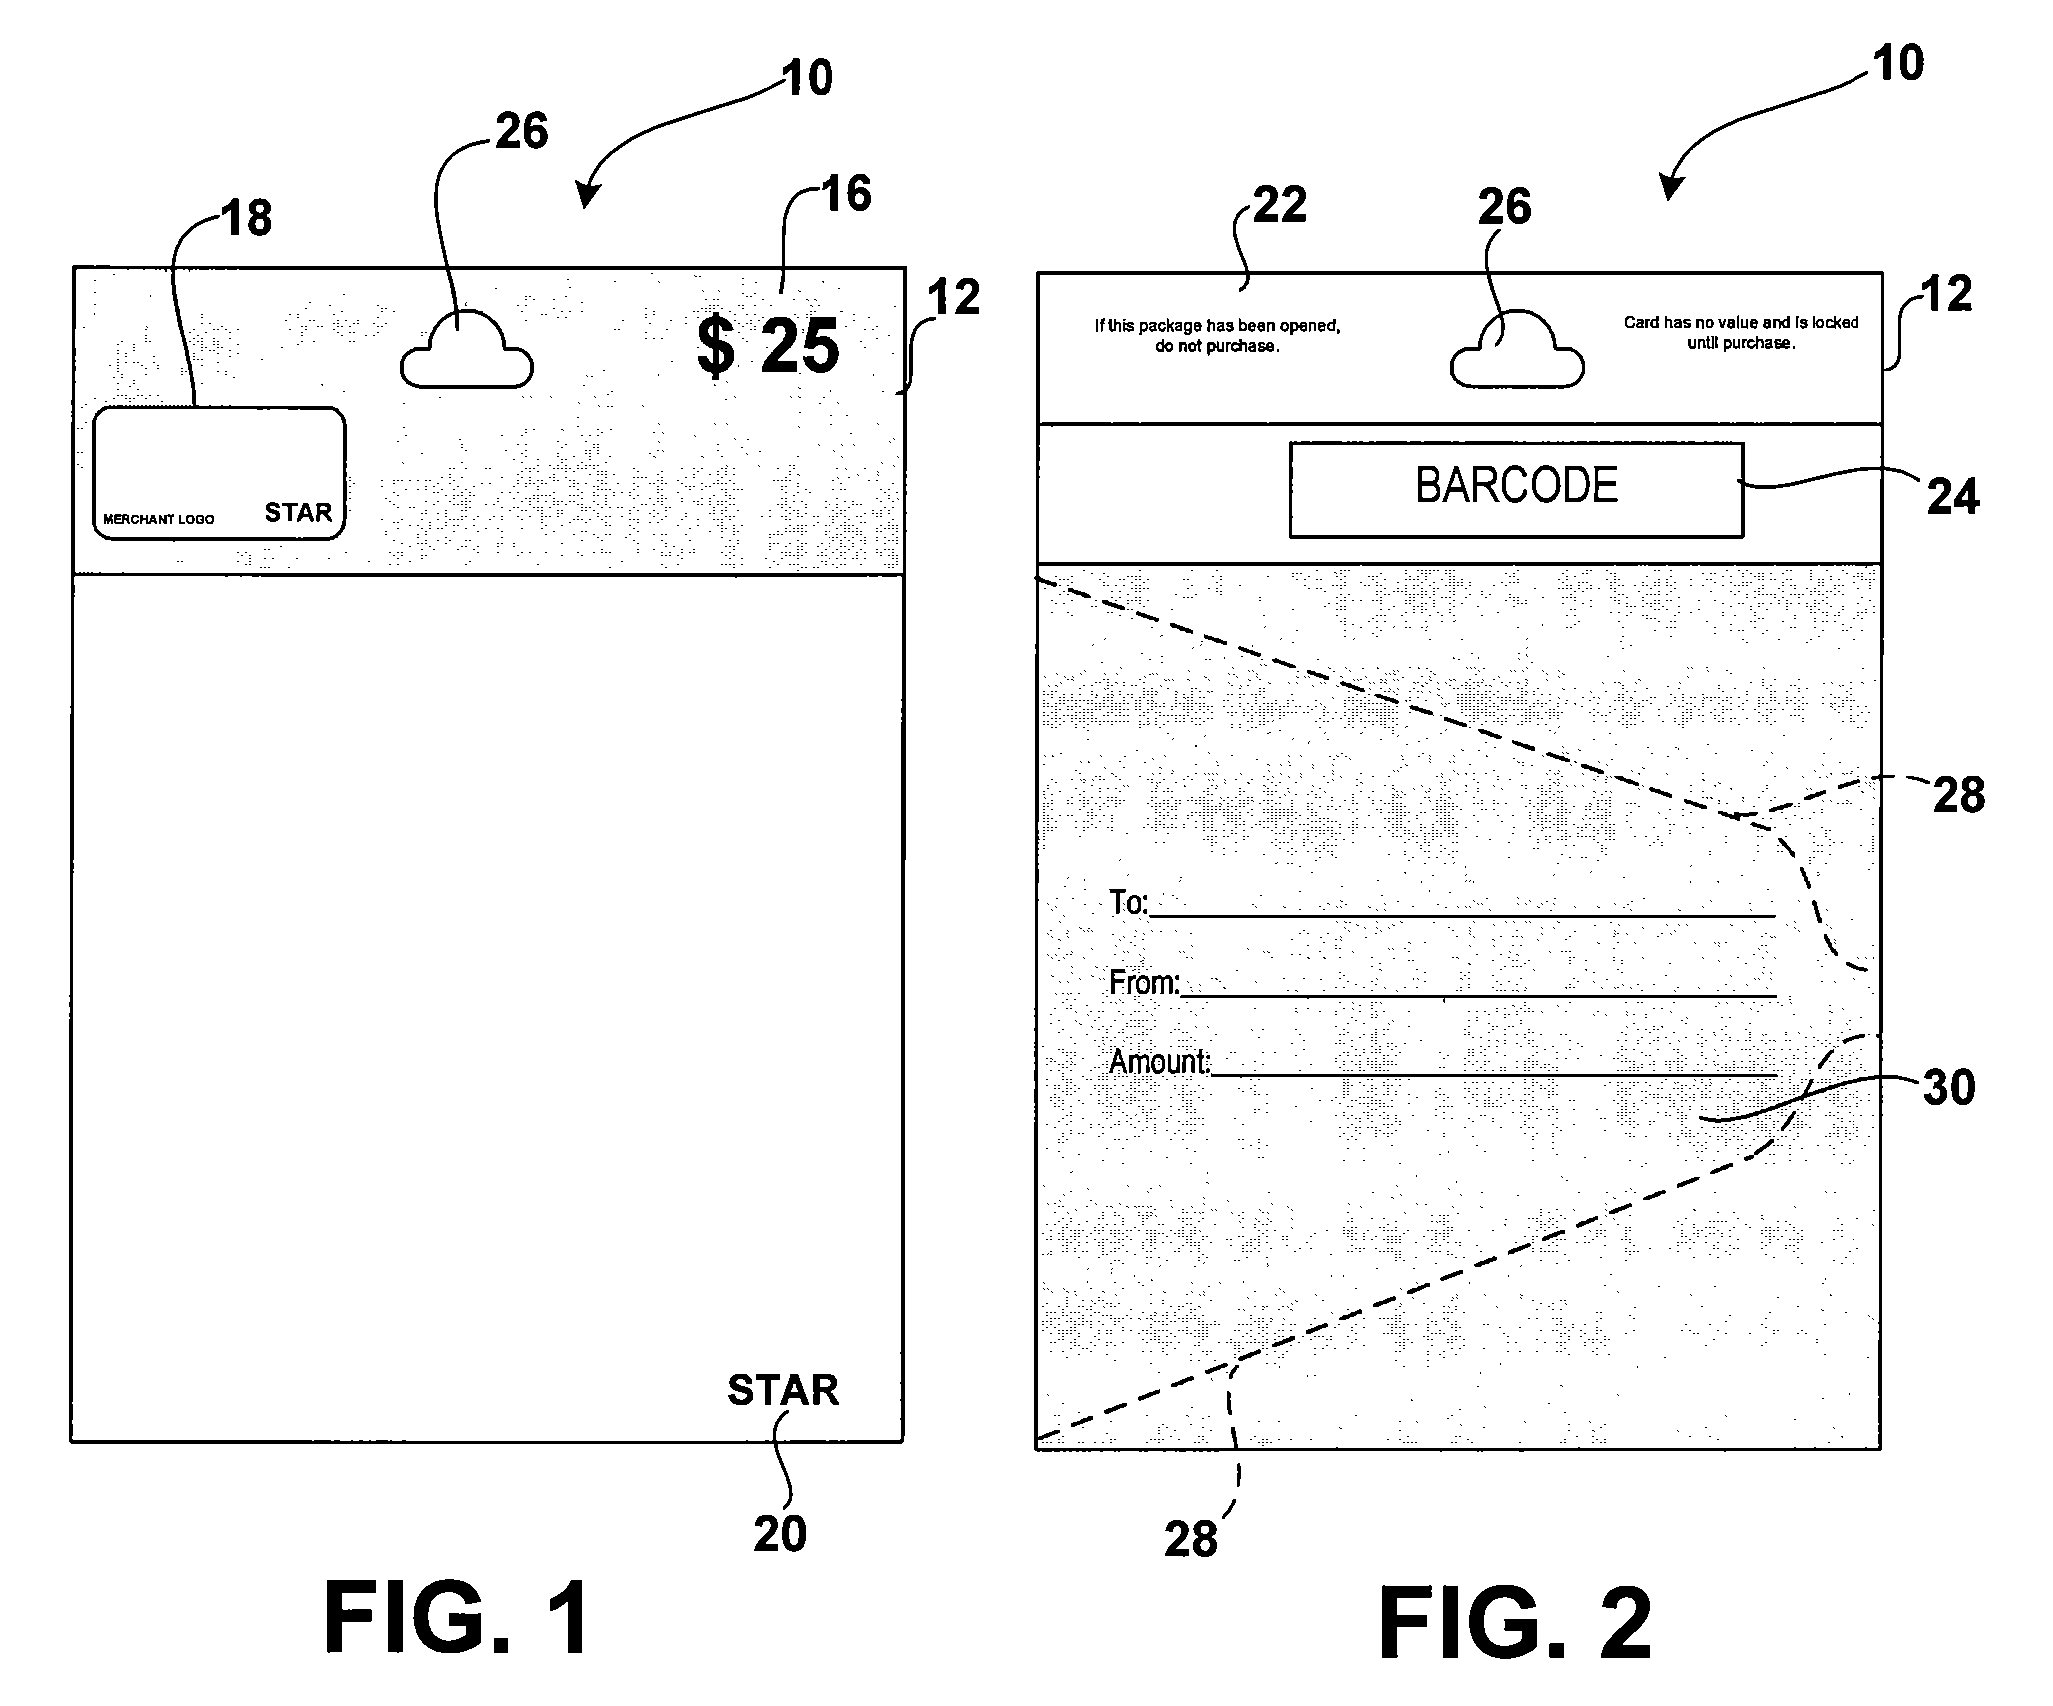 Presentation instrument with user-created pin and methods for activating